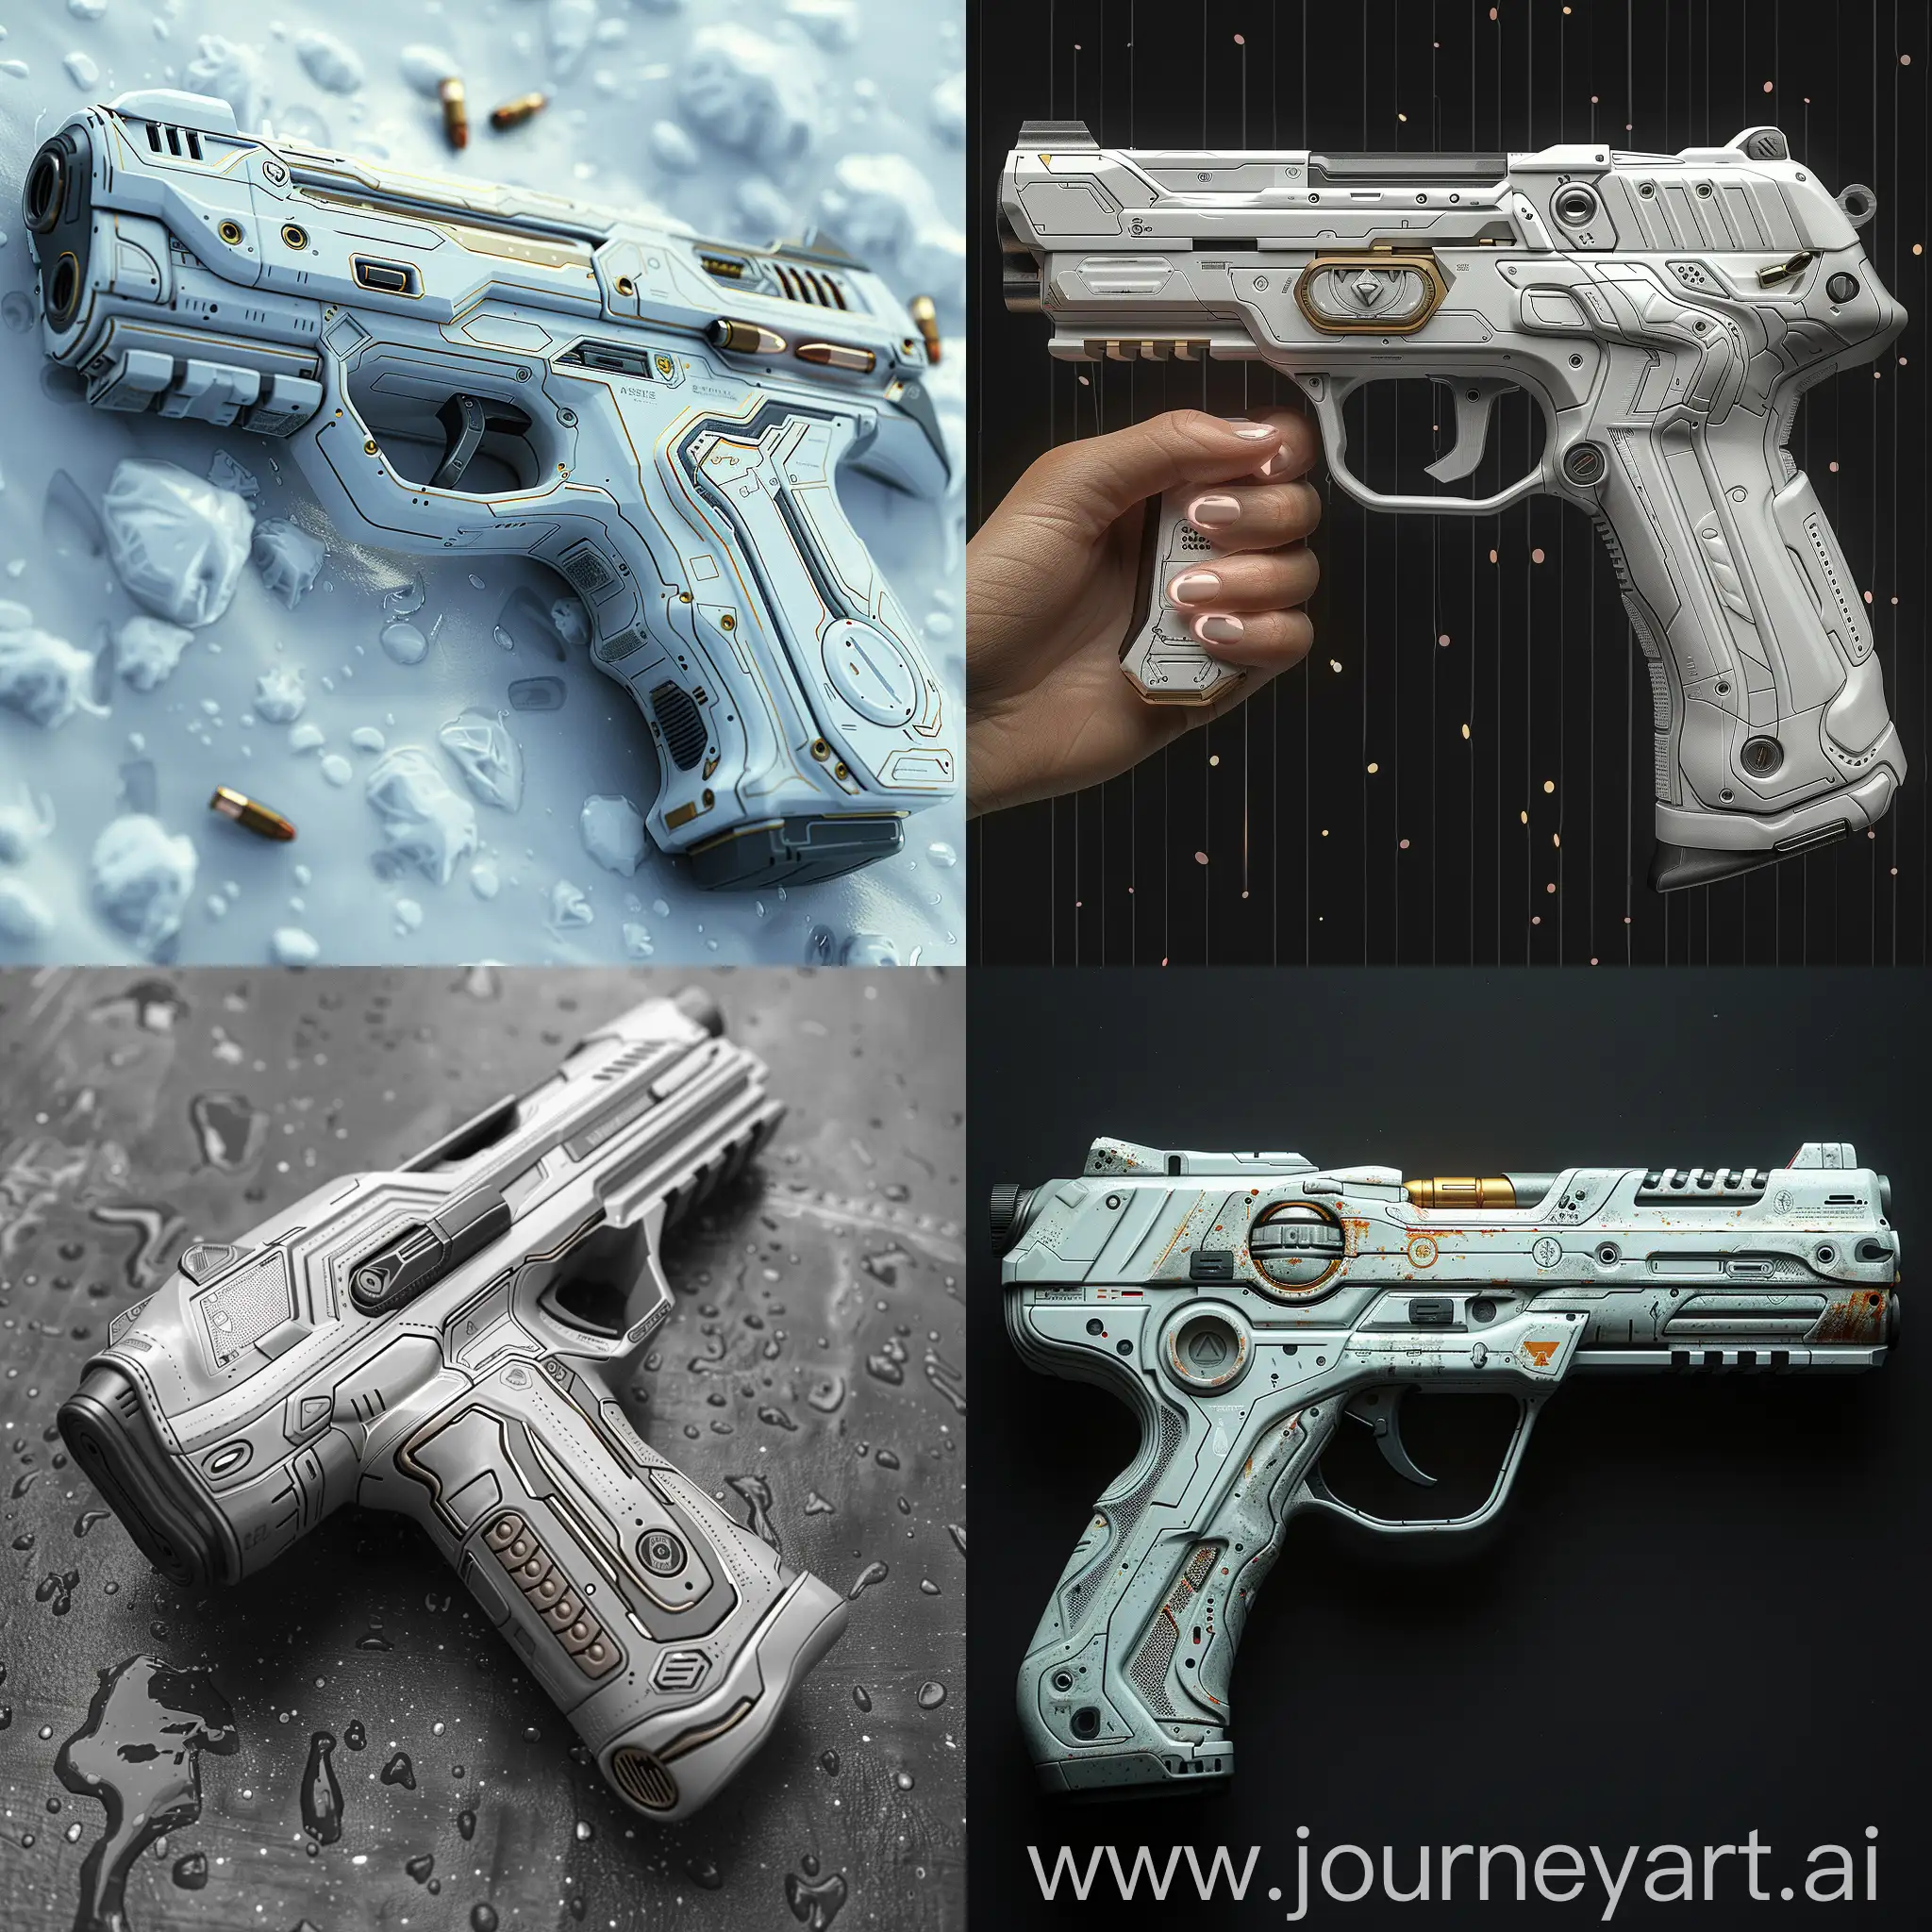 Futuristic-Biodegradable-Solar-Pistol-with-Smart-Features